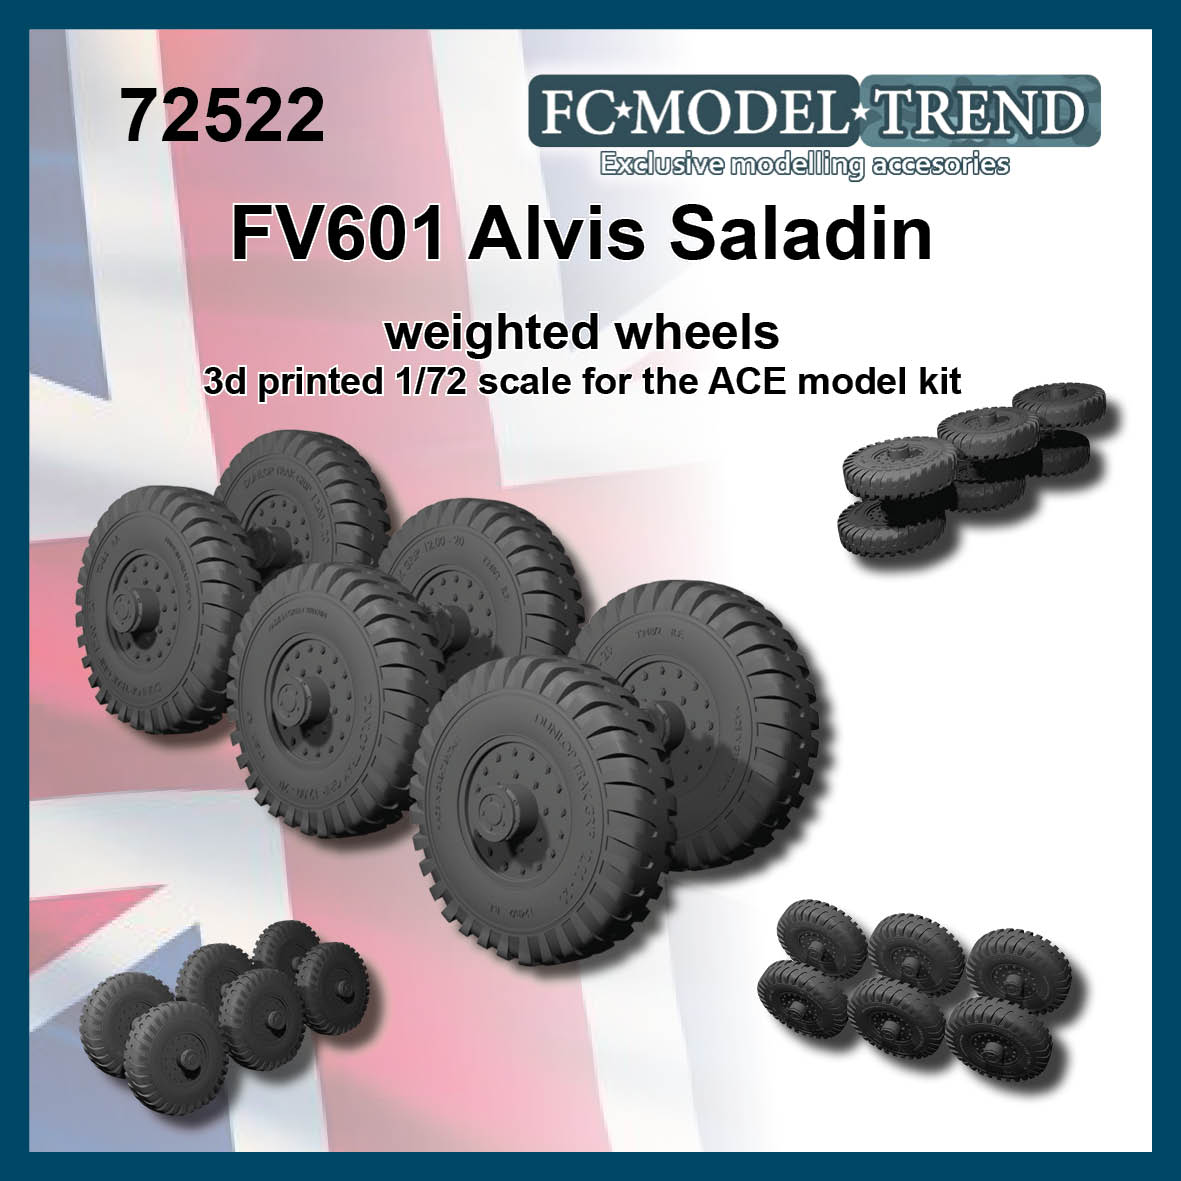 FV601 Alvis Saladin weighted wheels (ACE)